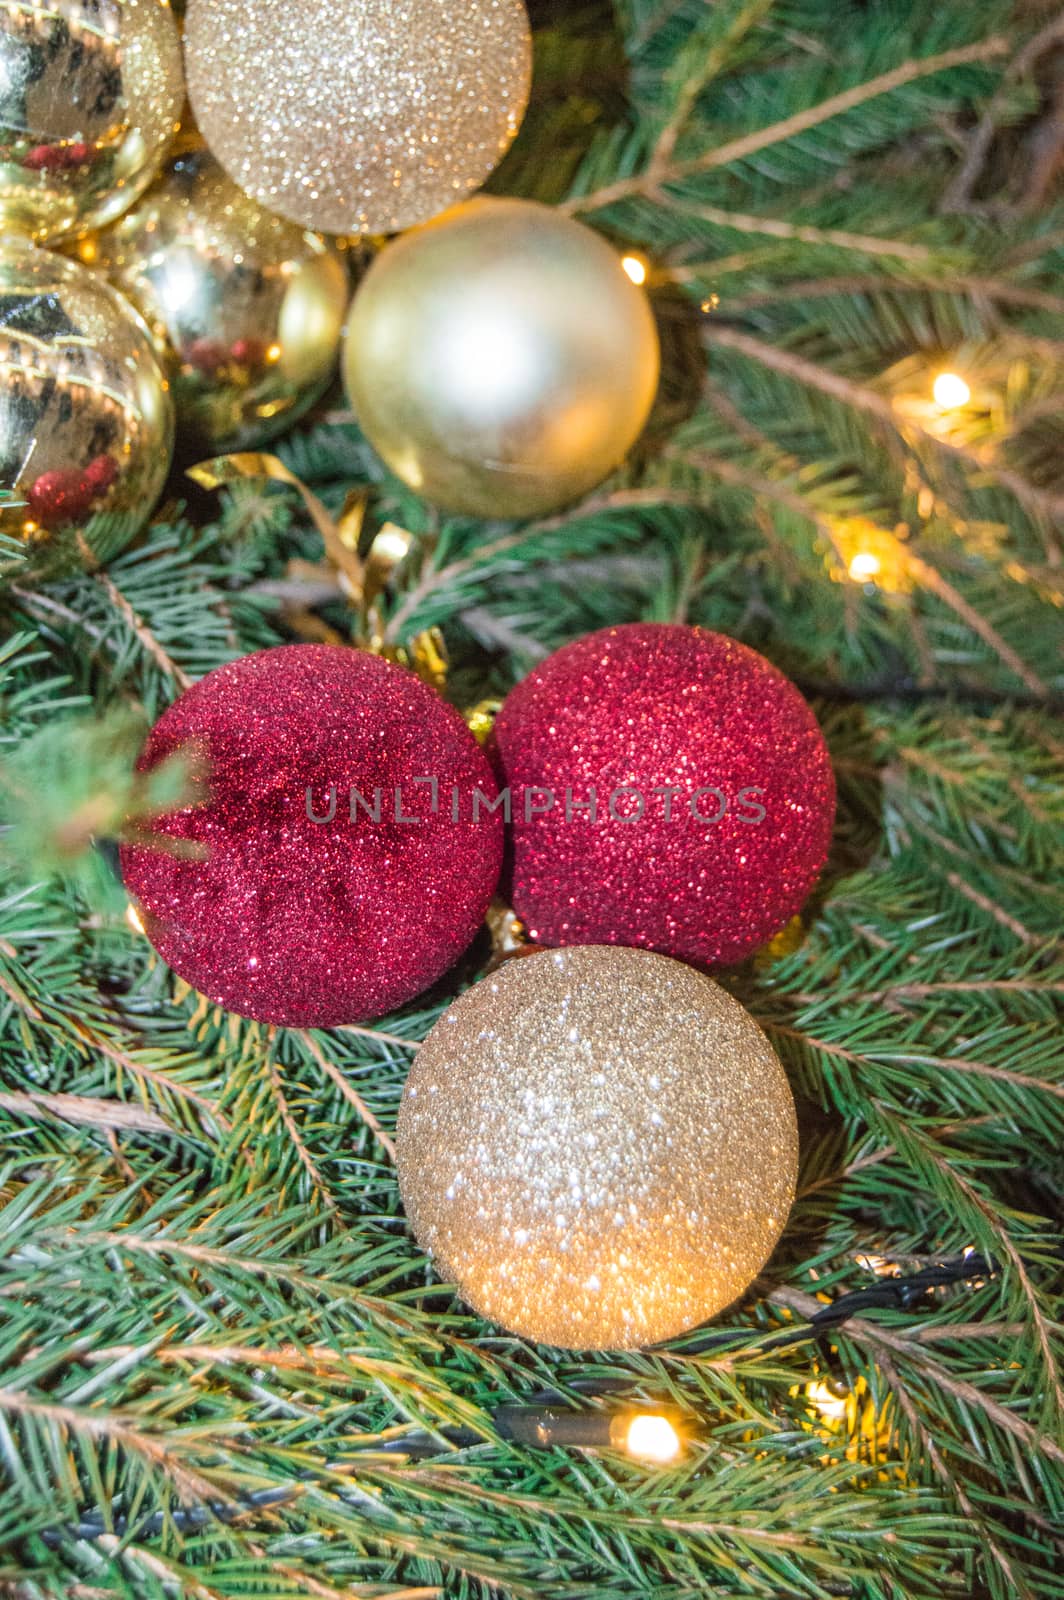 Cute Christmas sparkling red and gold glass balls on natural fir branches background, authentic Christmas background with fir branches and decorations, vertical frame.